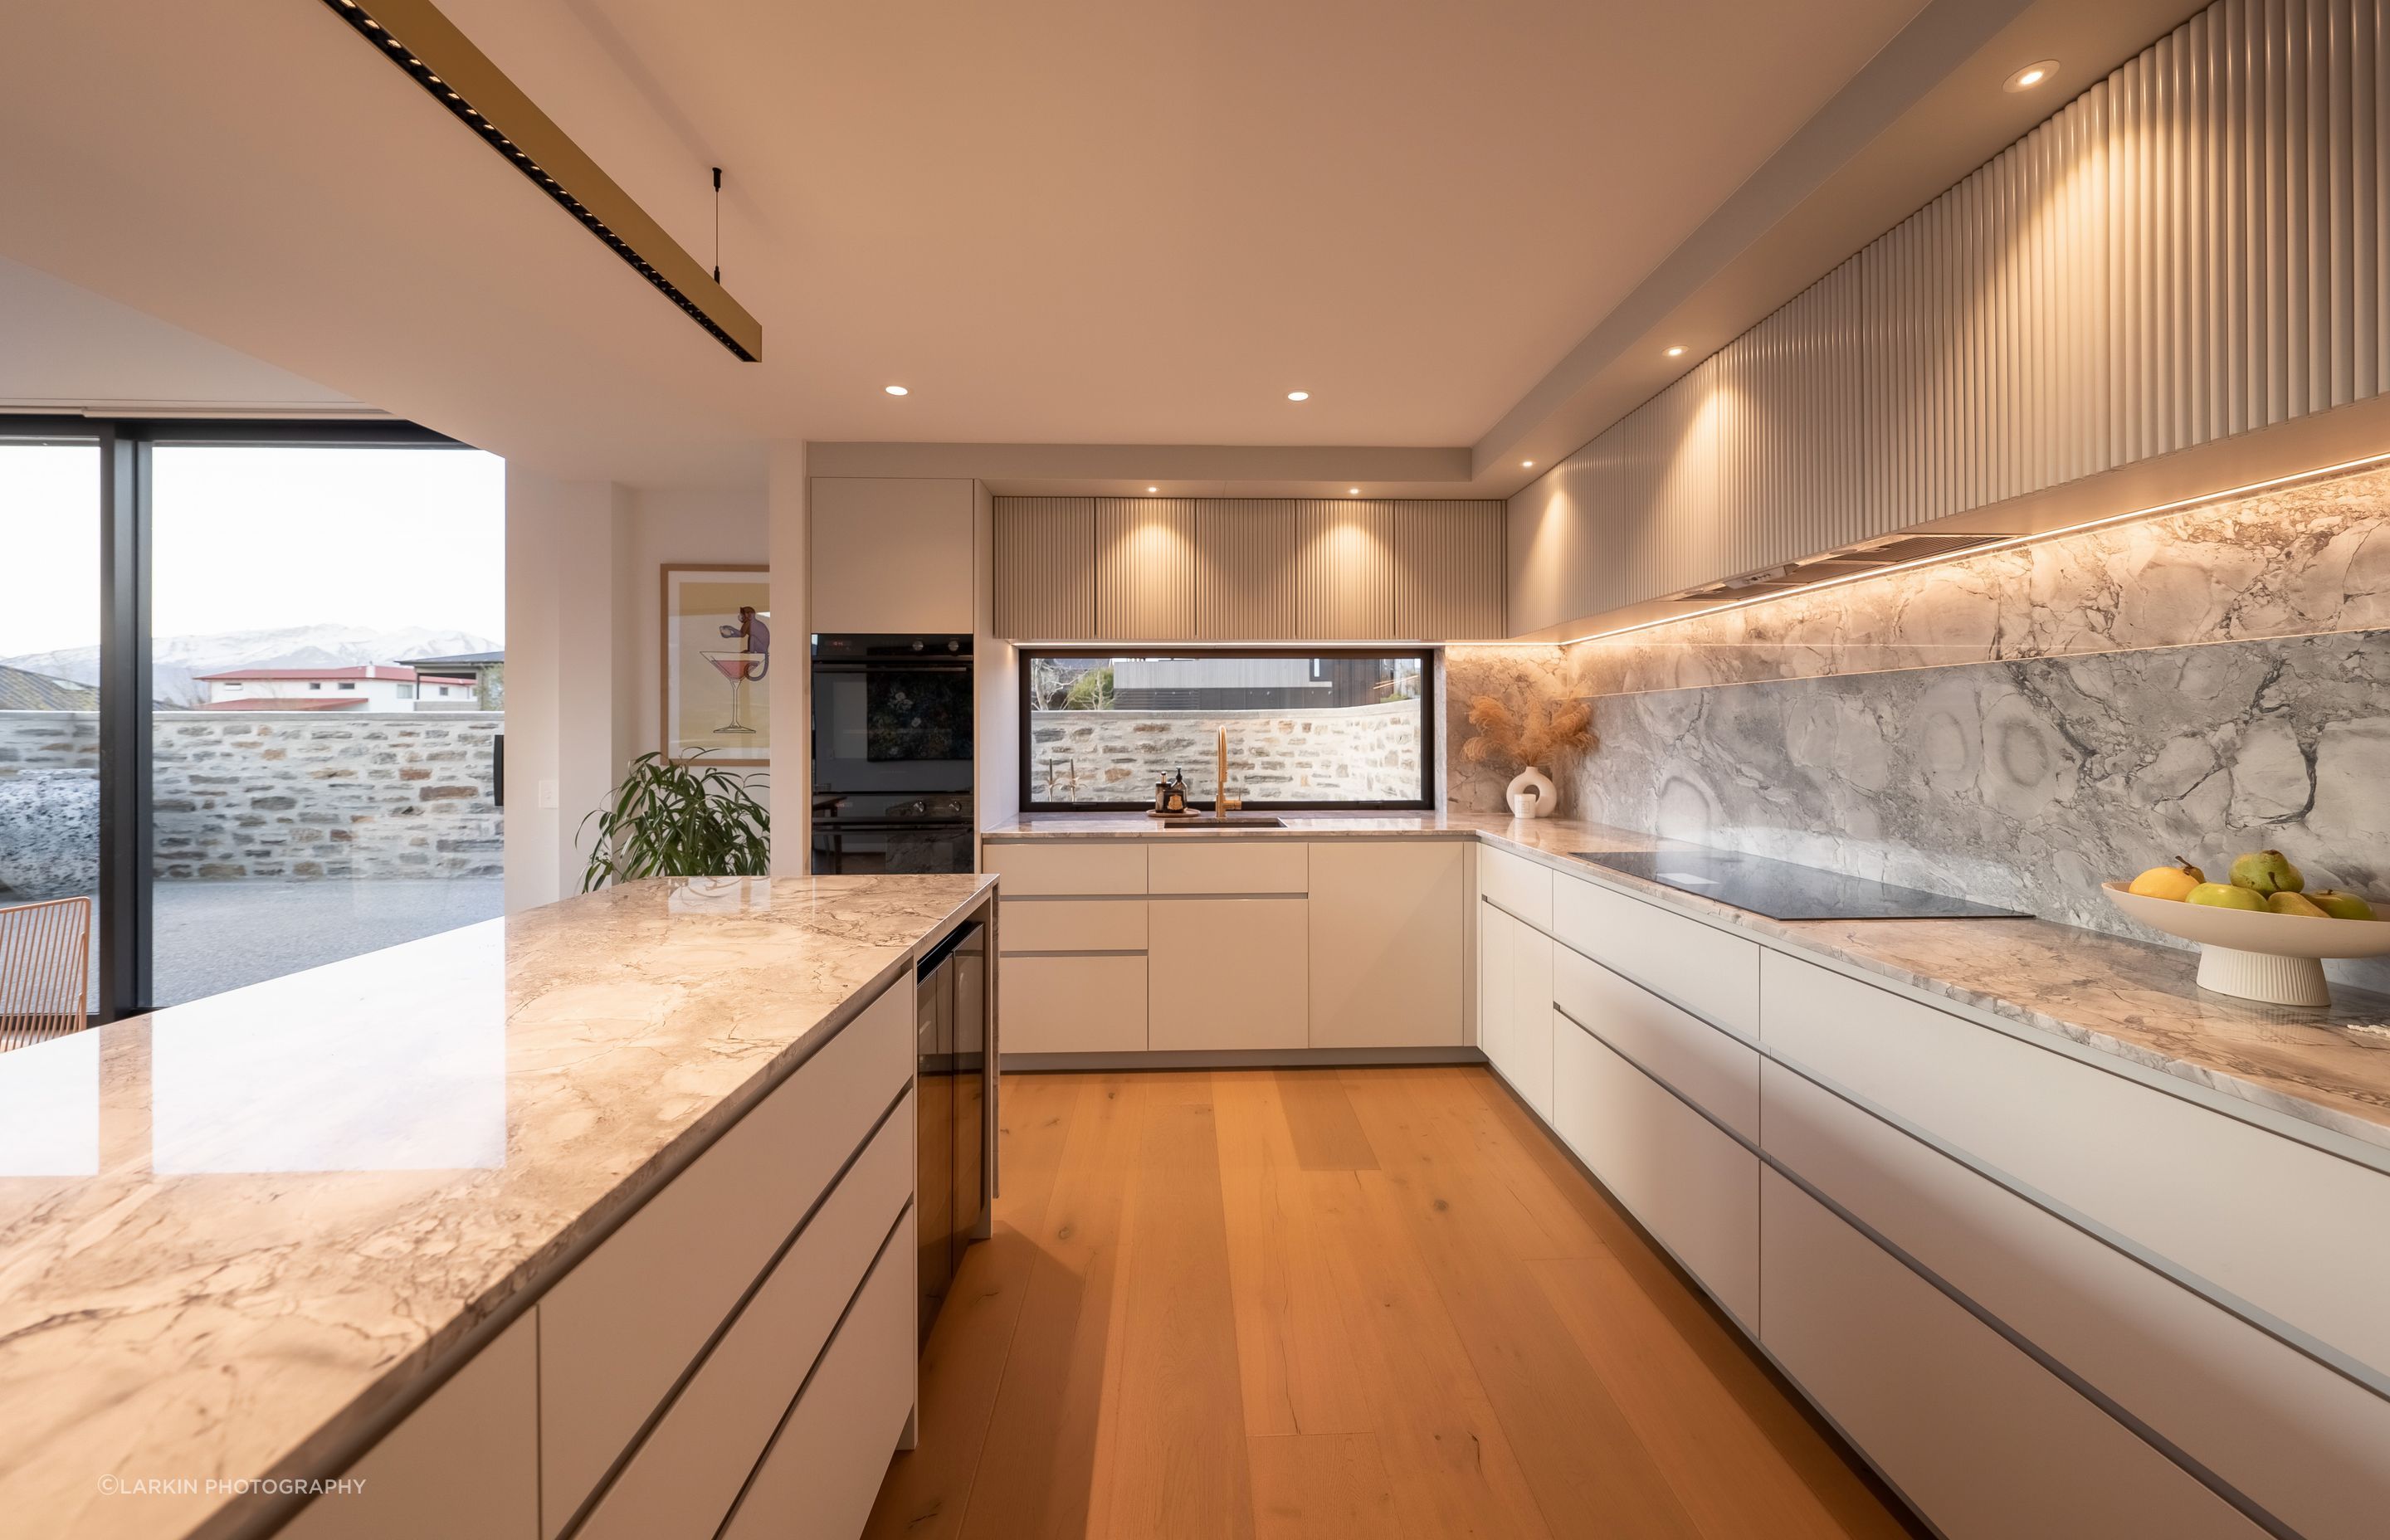 Luxurious travertine features in the new kitchen